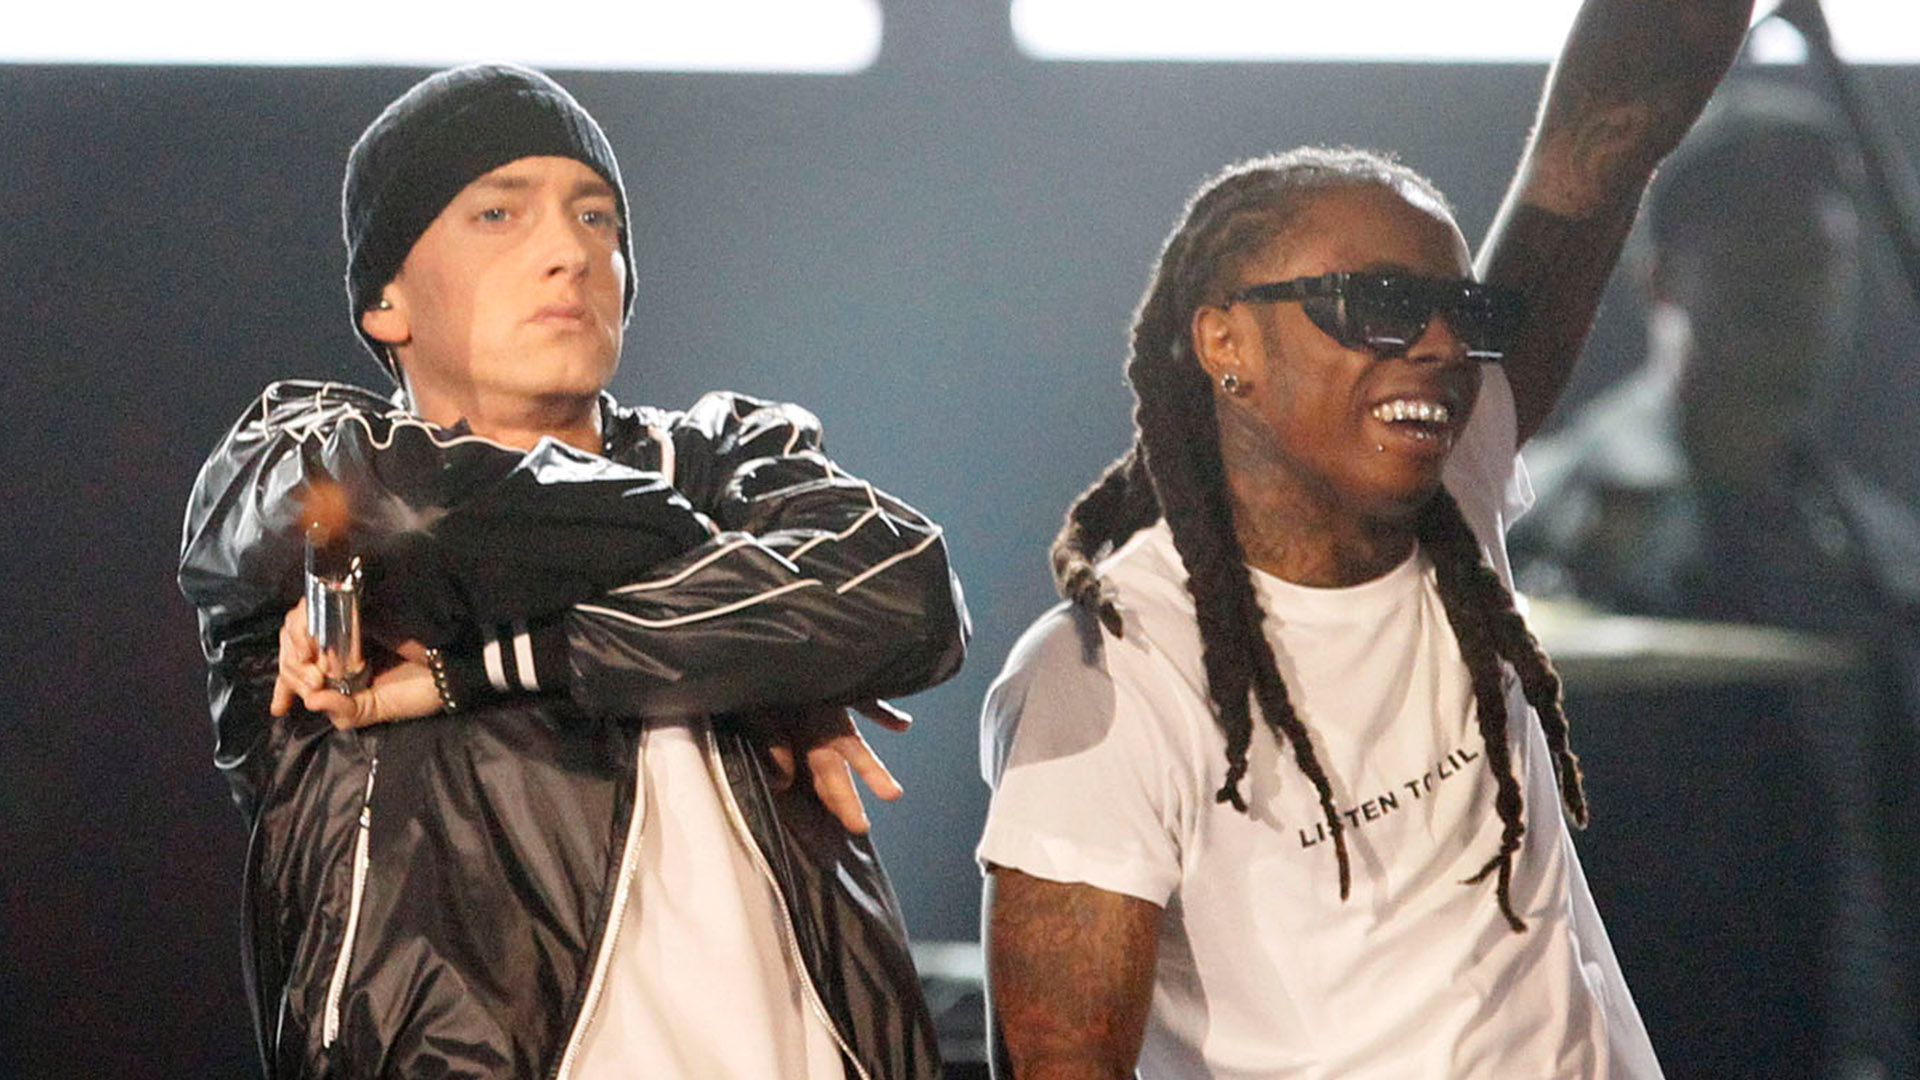 Lil Wayne: When You Get On That Joint With Eminem Its Like A Championship Game!